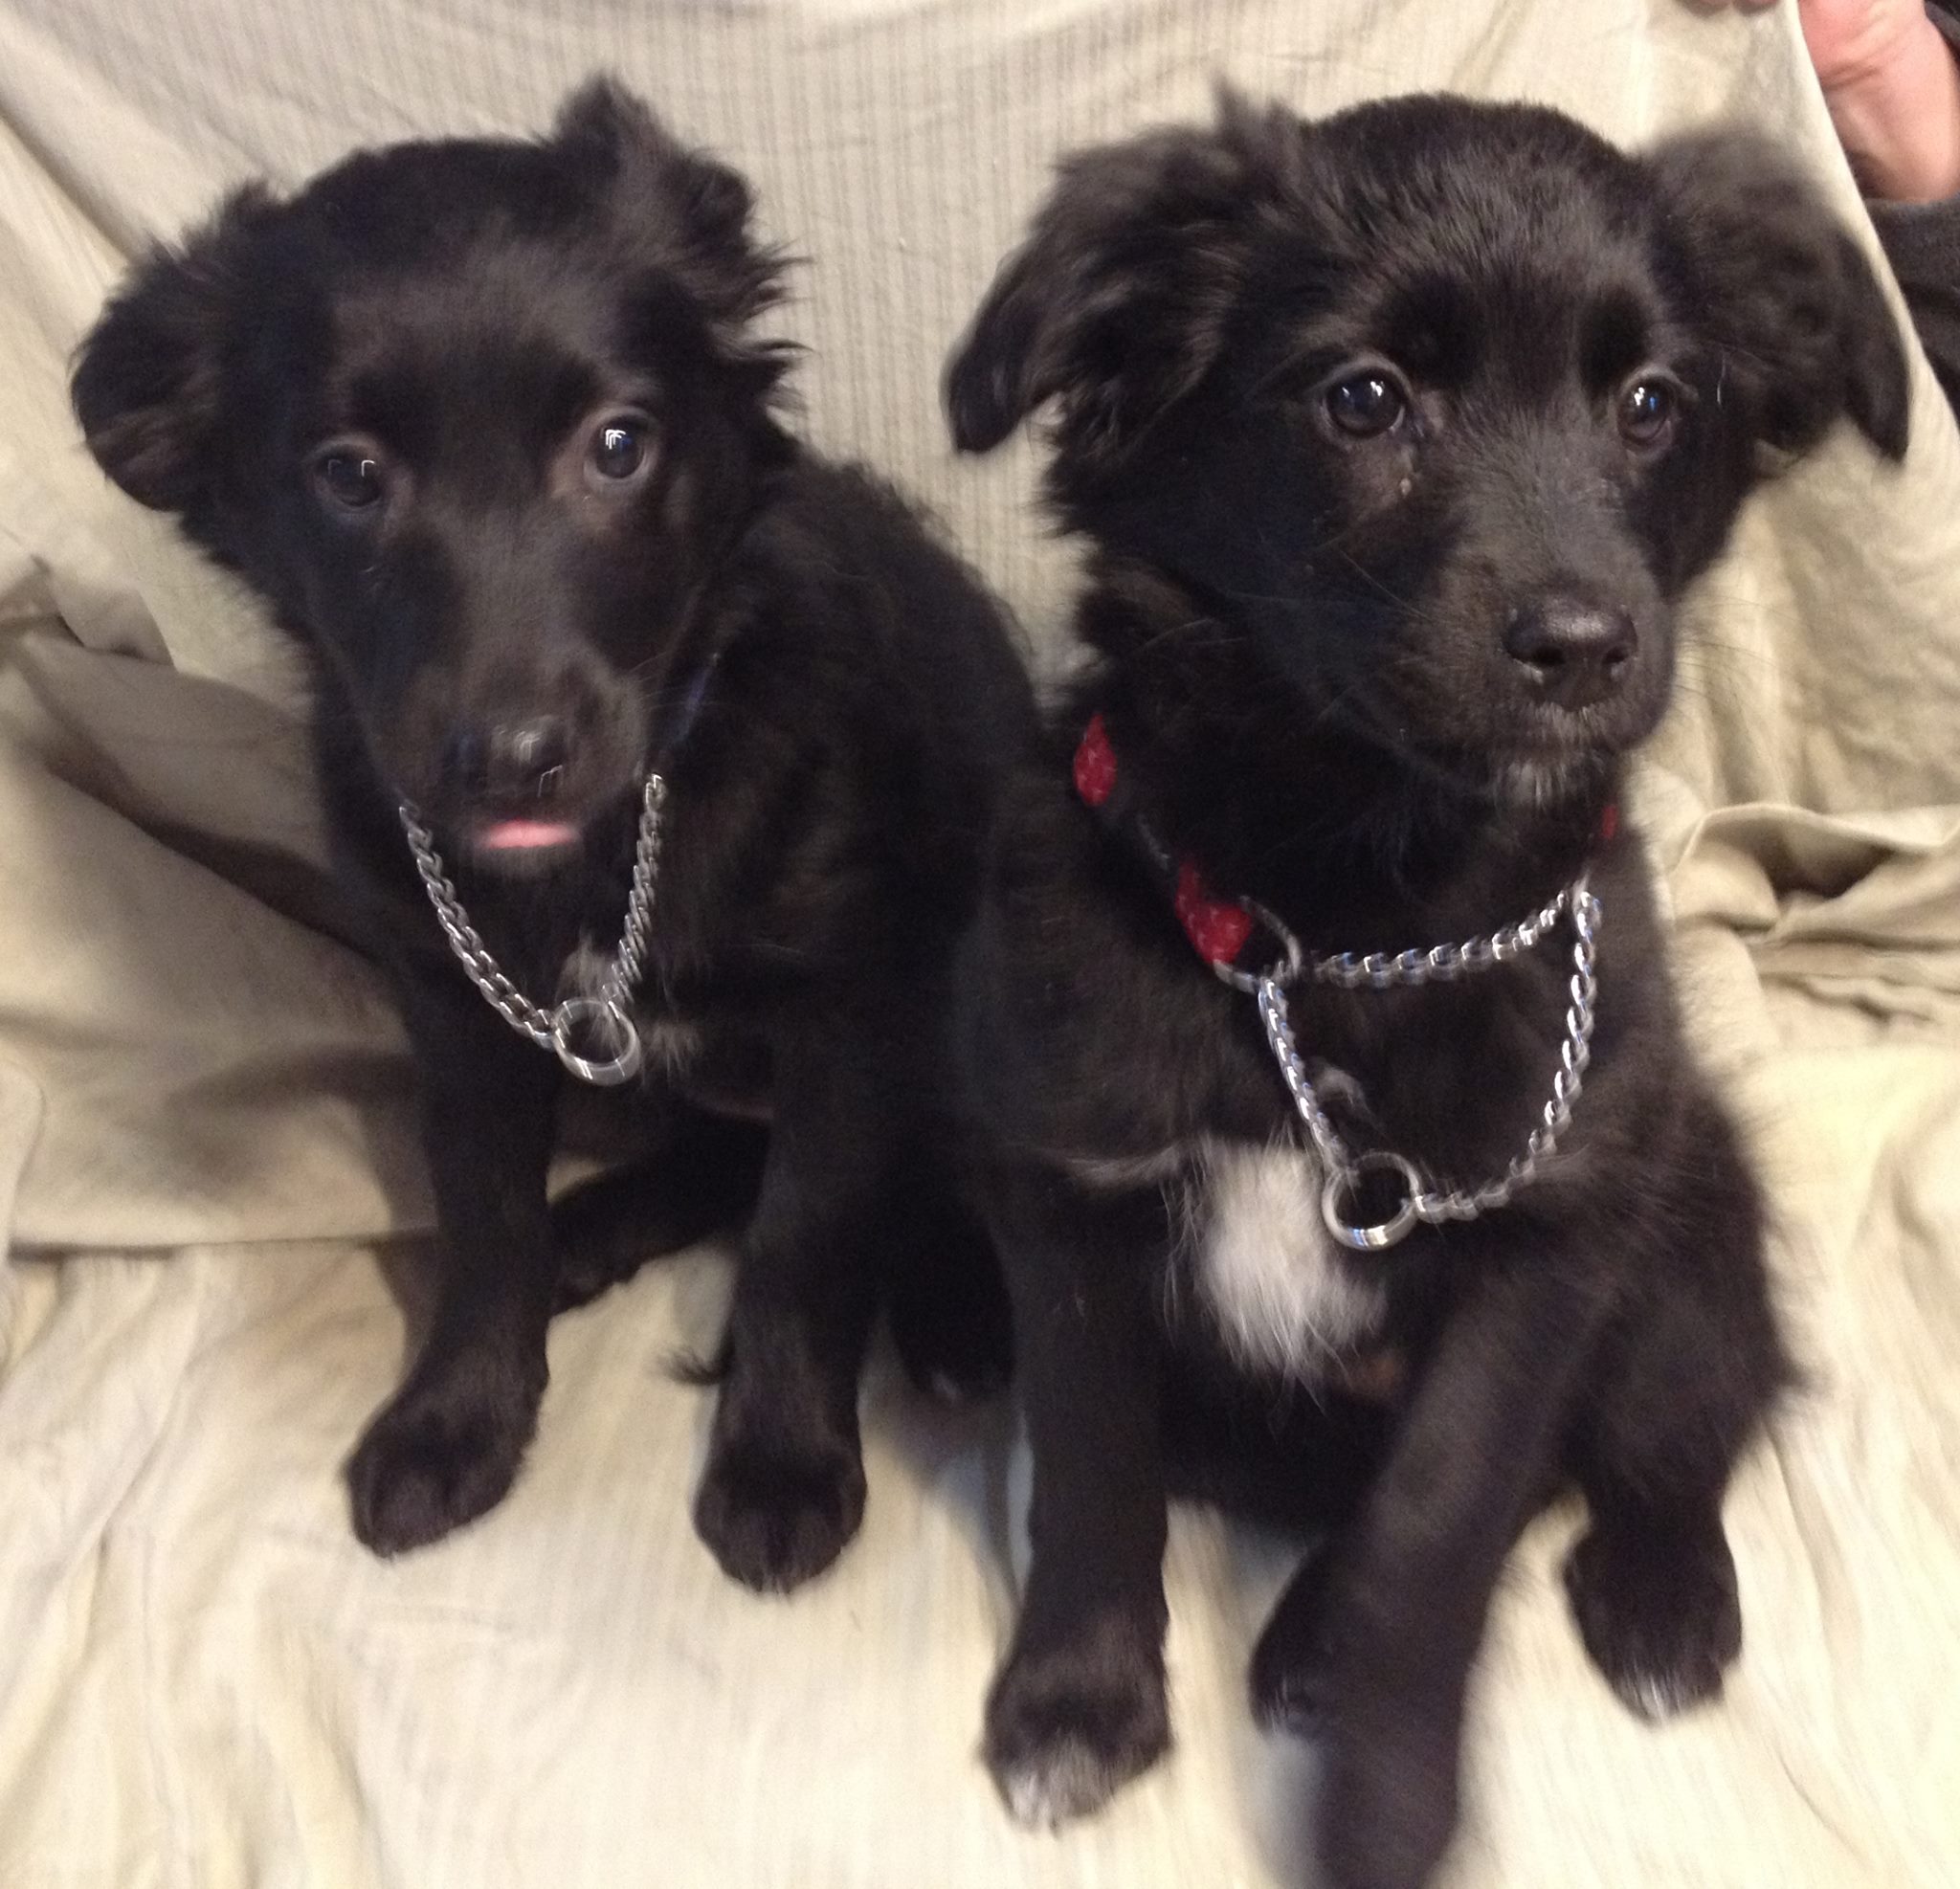 Licker and Rish are twin sibling females. They are about 10 weeks old and will be medium sized dogs. 